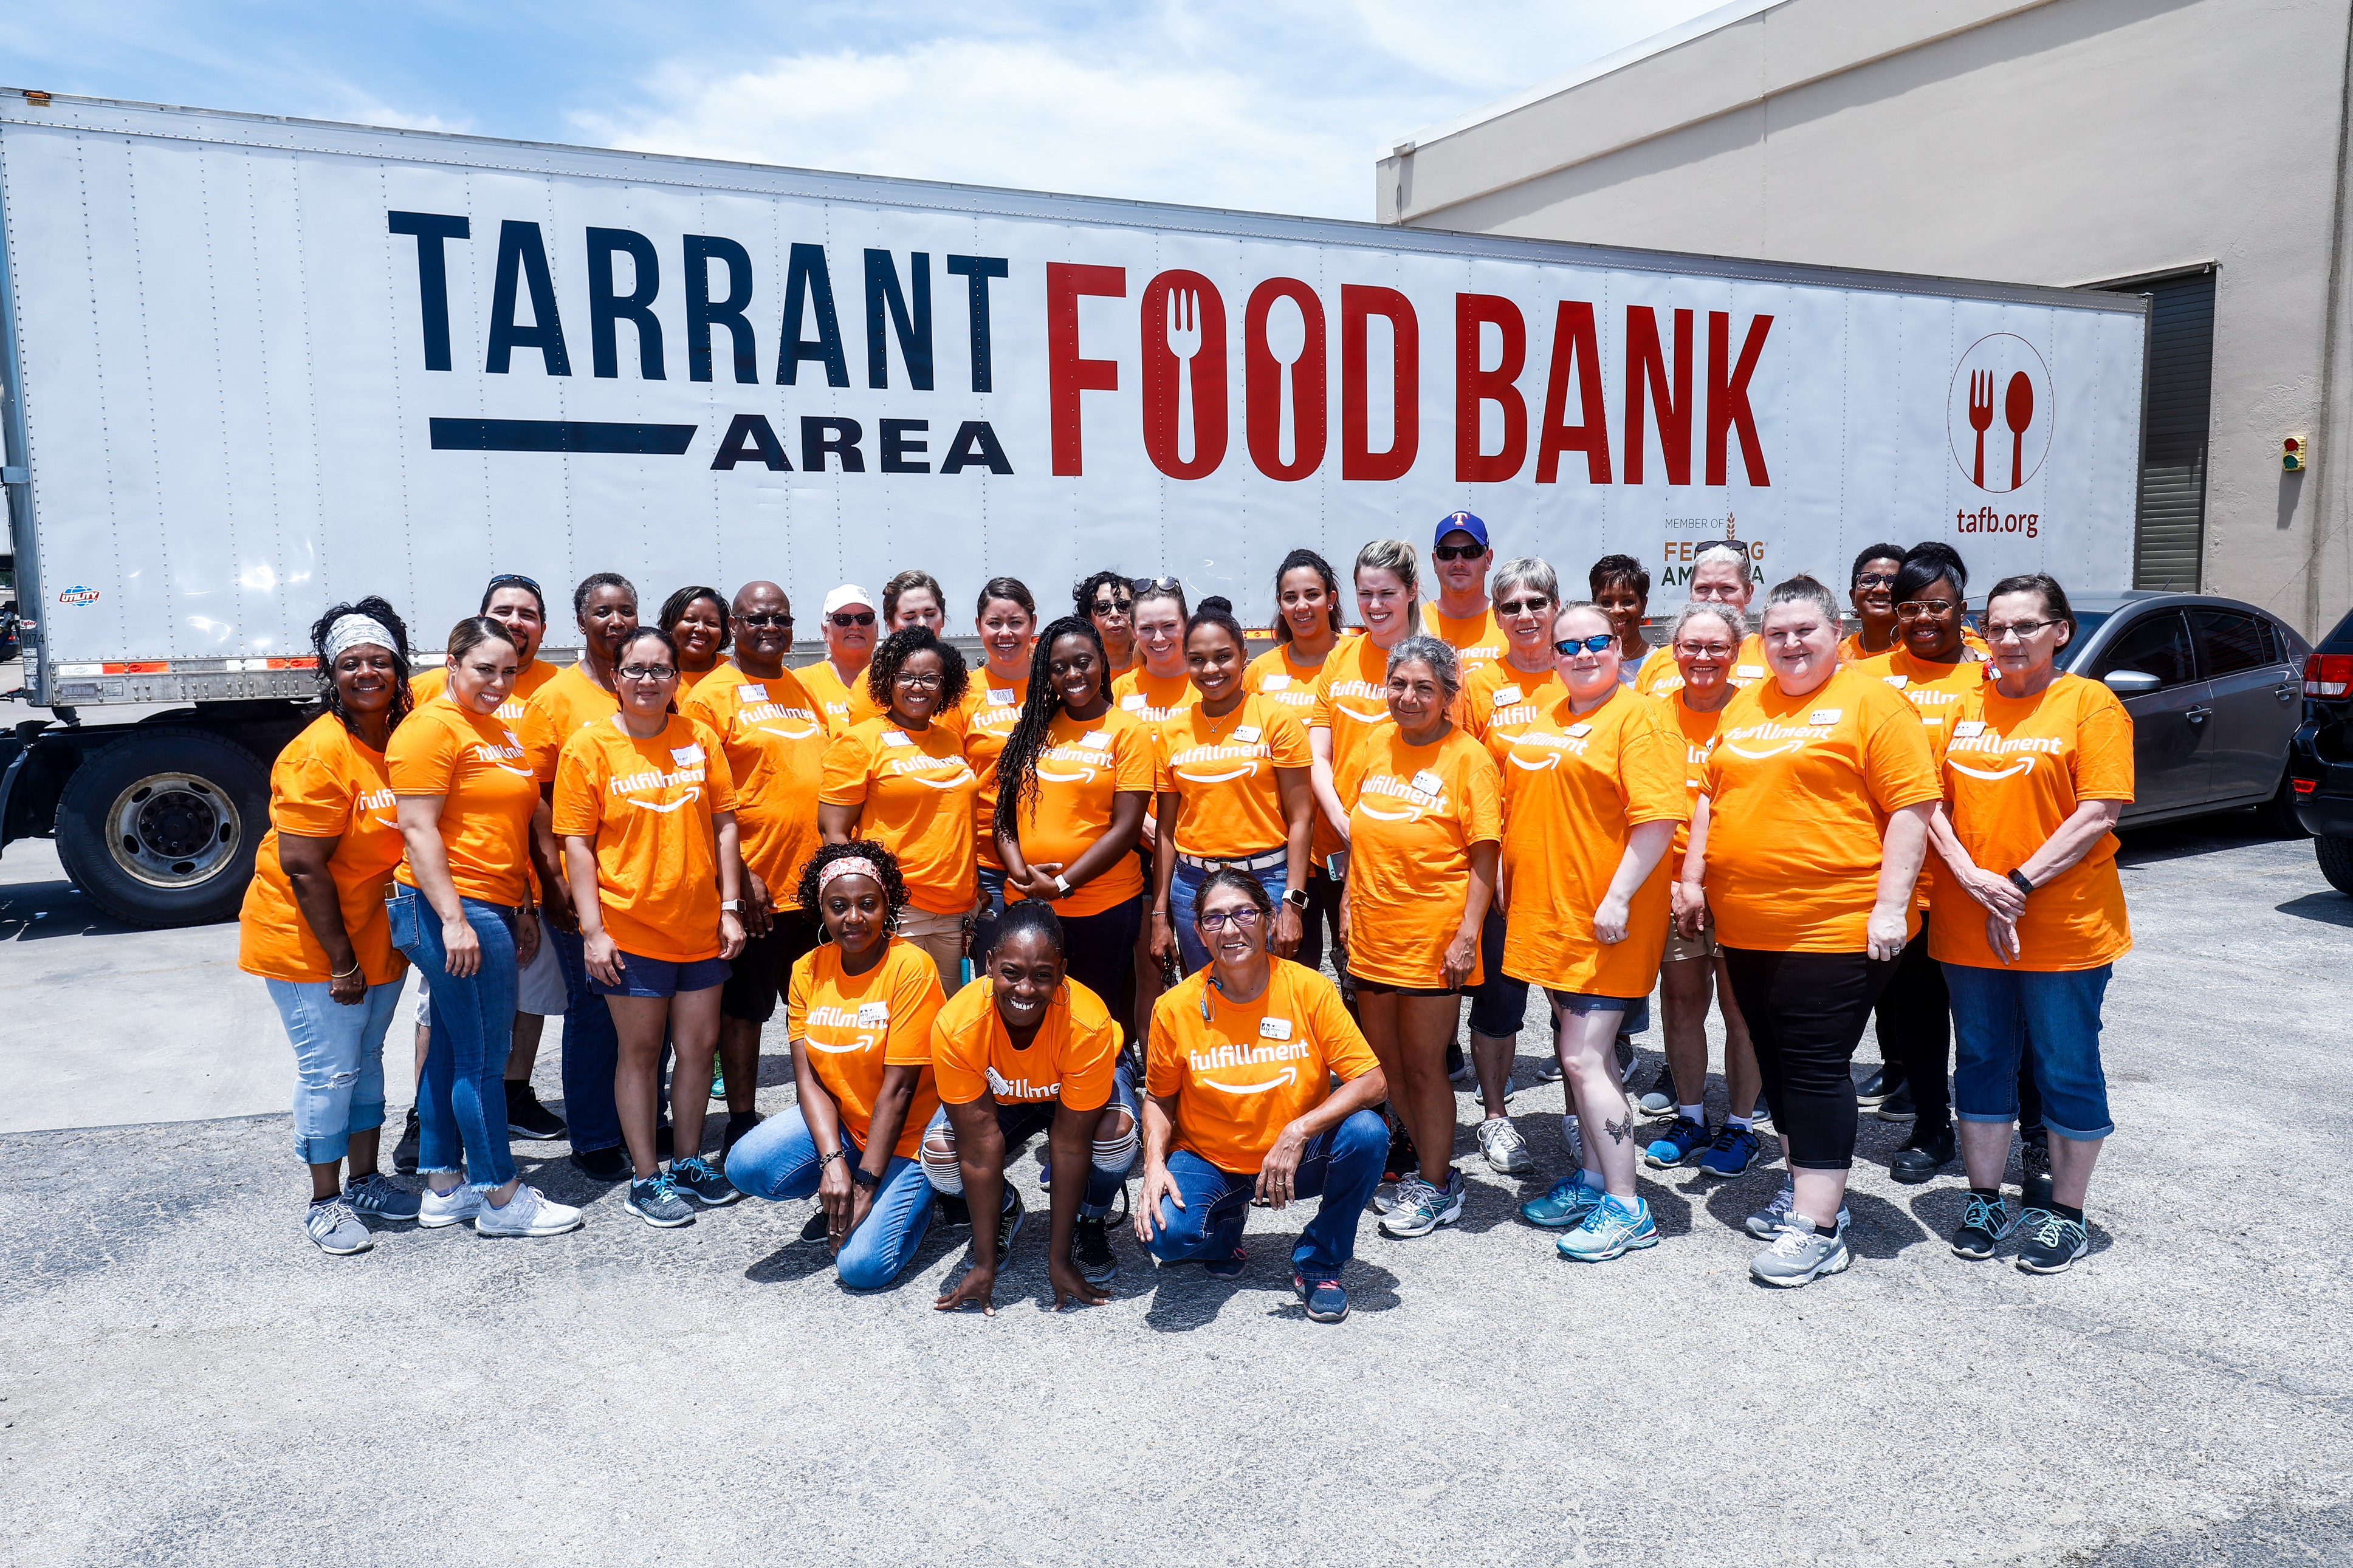 Amazon Fights Hunger with $10,000 Donation to Tarrant Area Food Bank’s Food for Kids Program